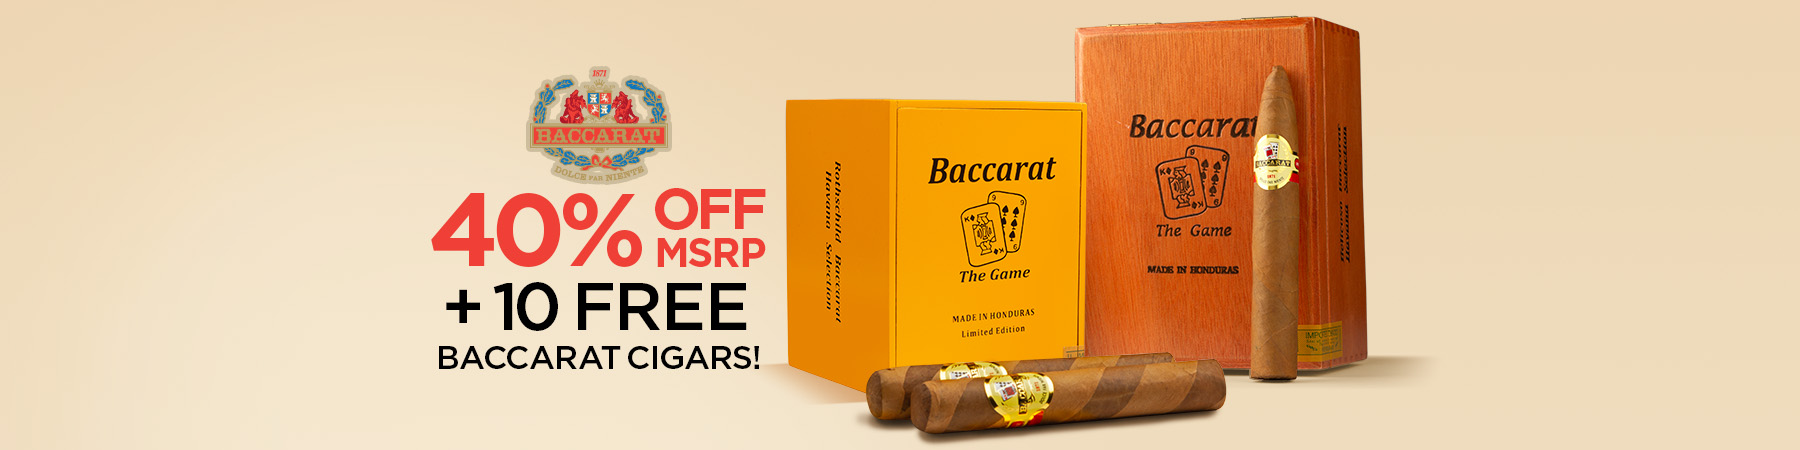 40% Off MSRP 					
+ 10 Free Baccarat Cigars!